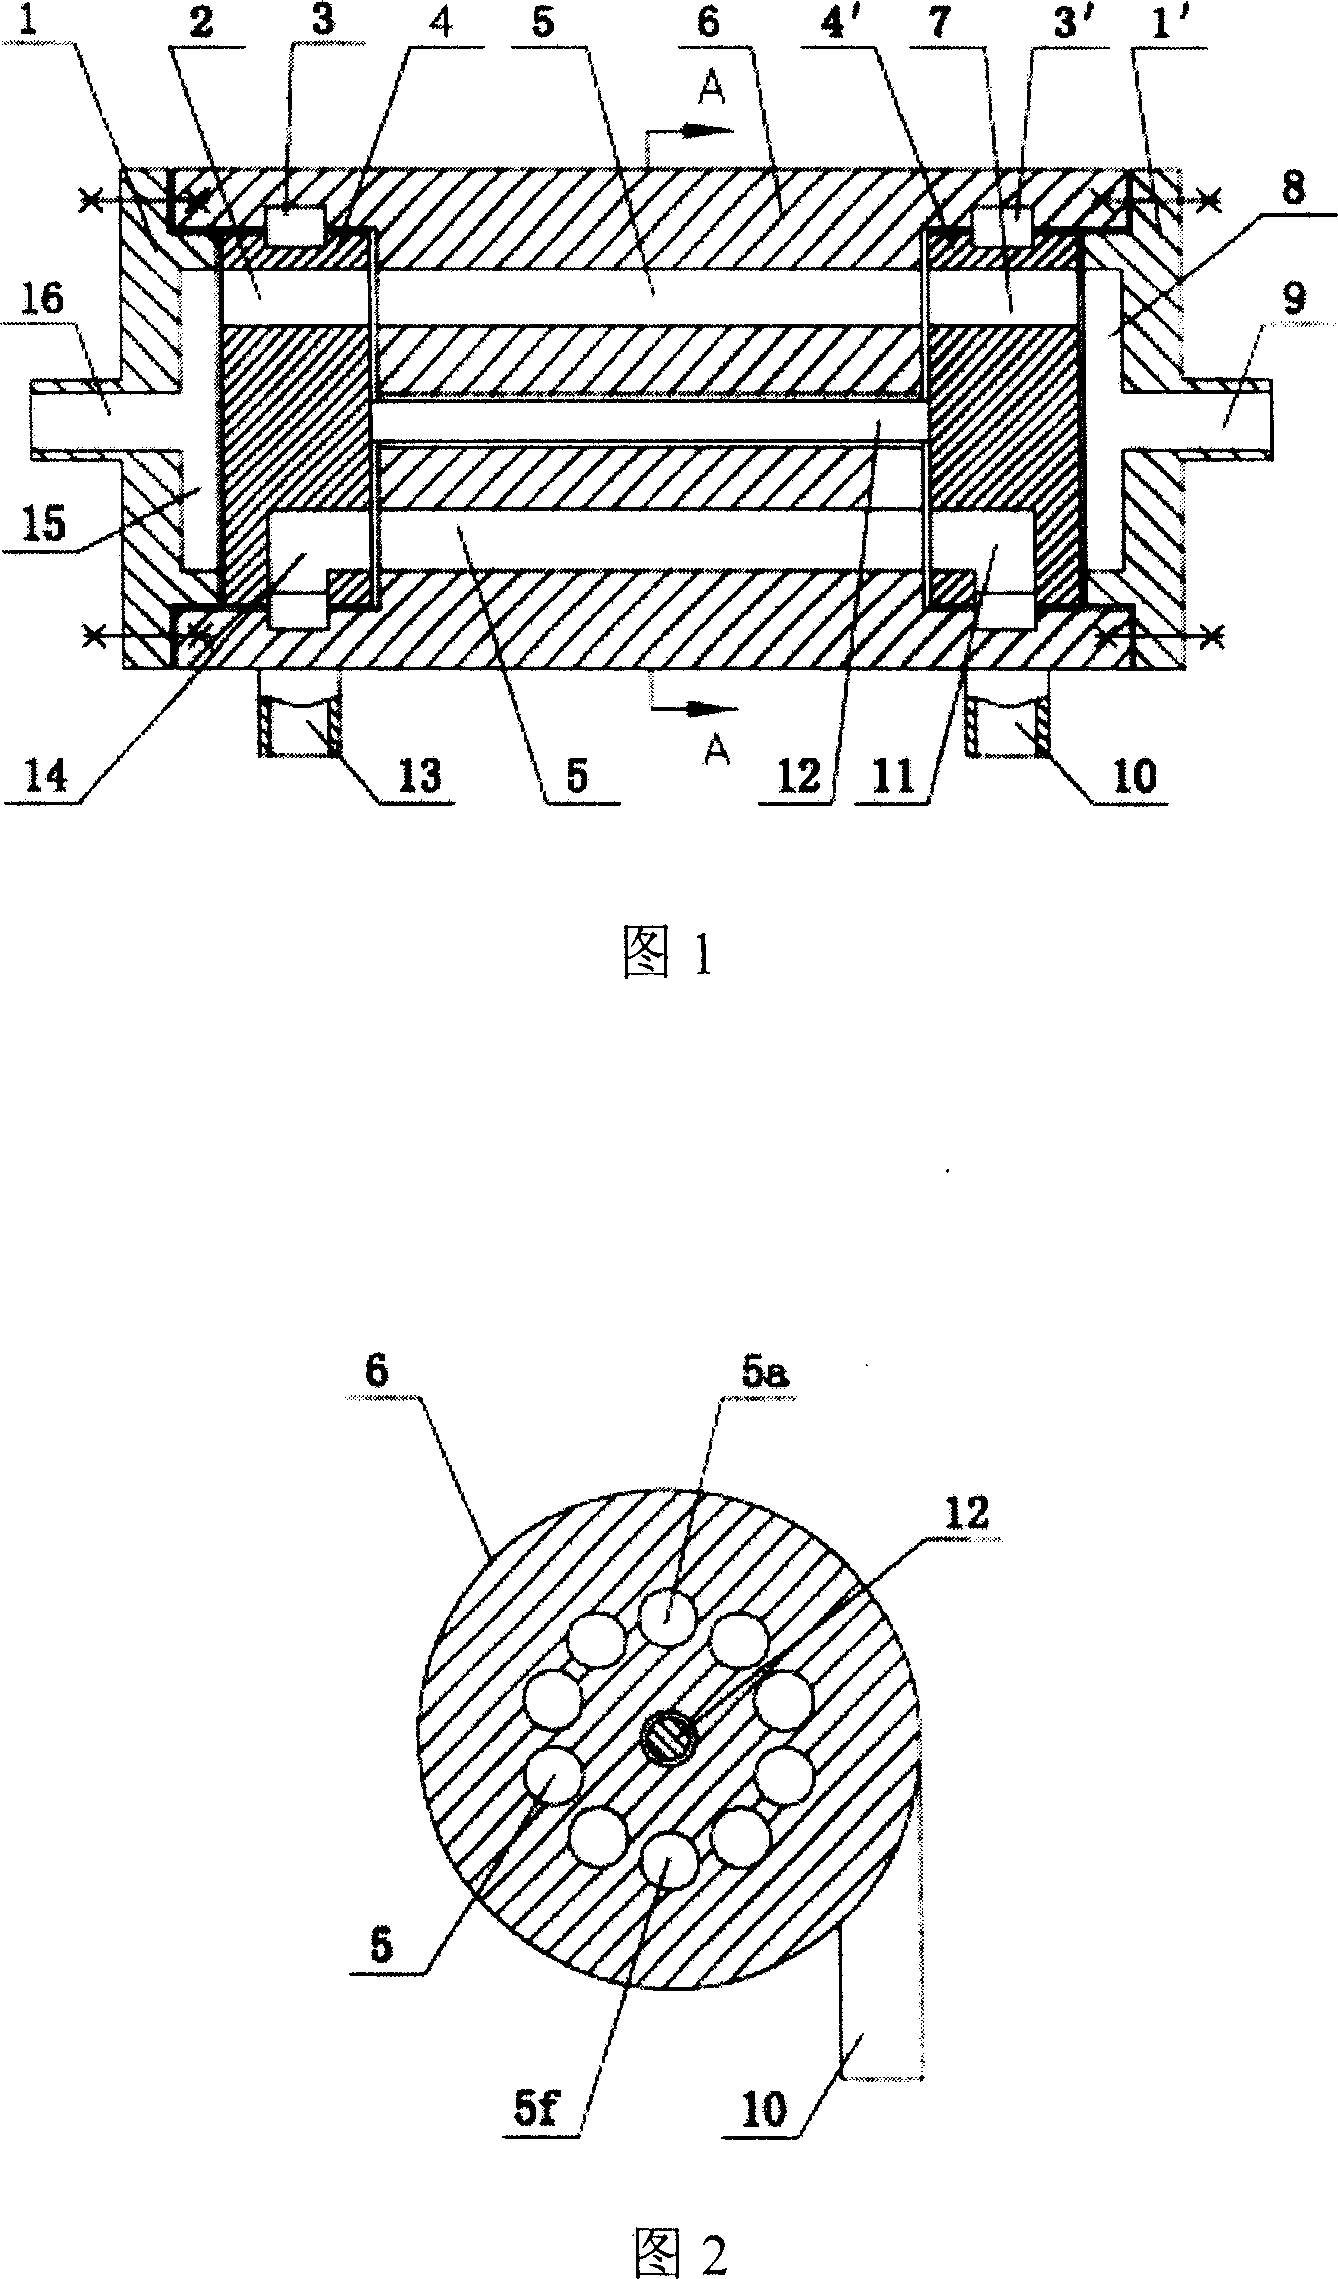 Double-dial coupled type pressure exchanger for sea water or brine reverse osmosis desalination system